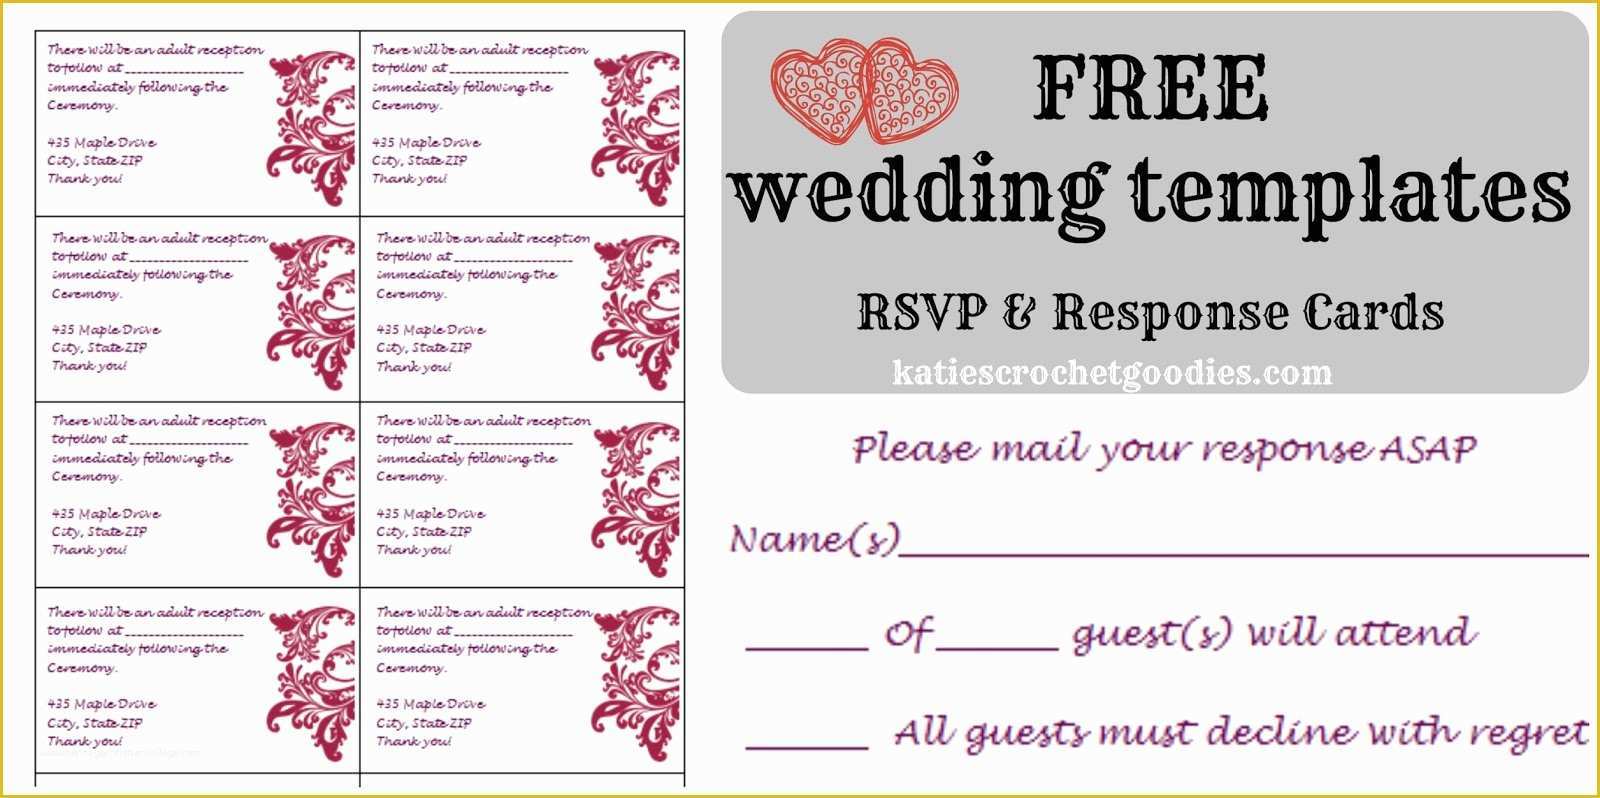 Free Wedding Postcard Template Of Free Wedding Templates Rsvp & Reception Cards Katie S